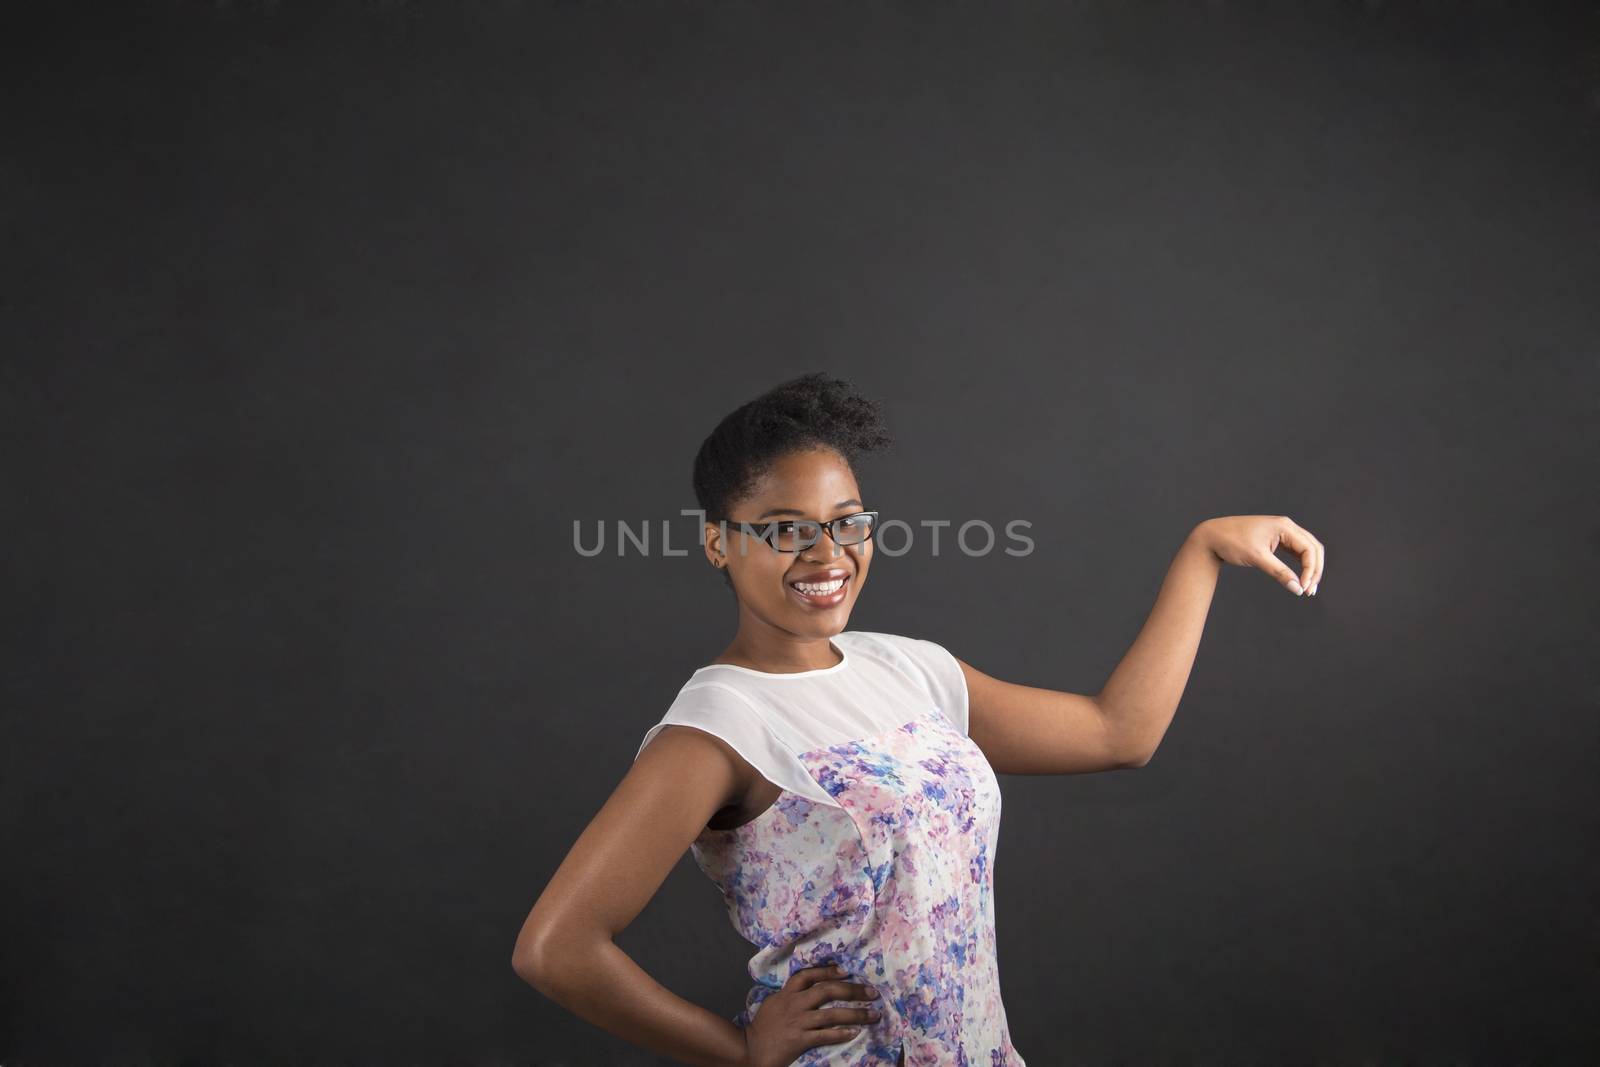 South African or African American woman teacher or student holding object out to the side on chalk black board background